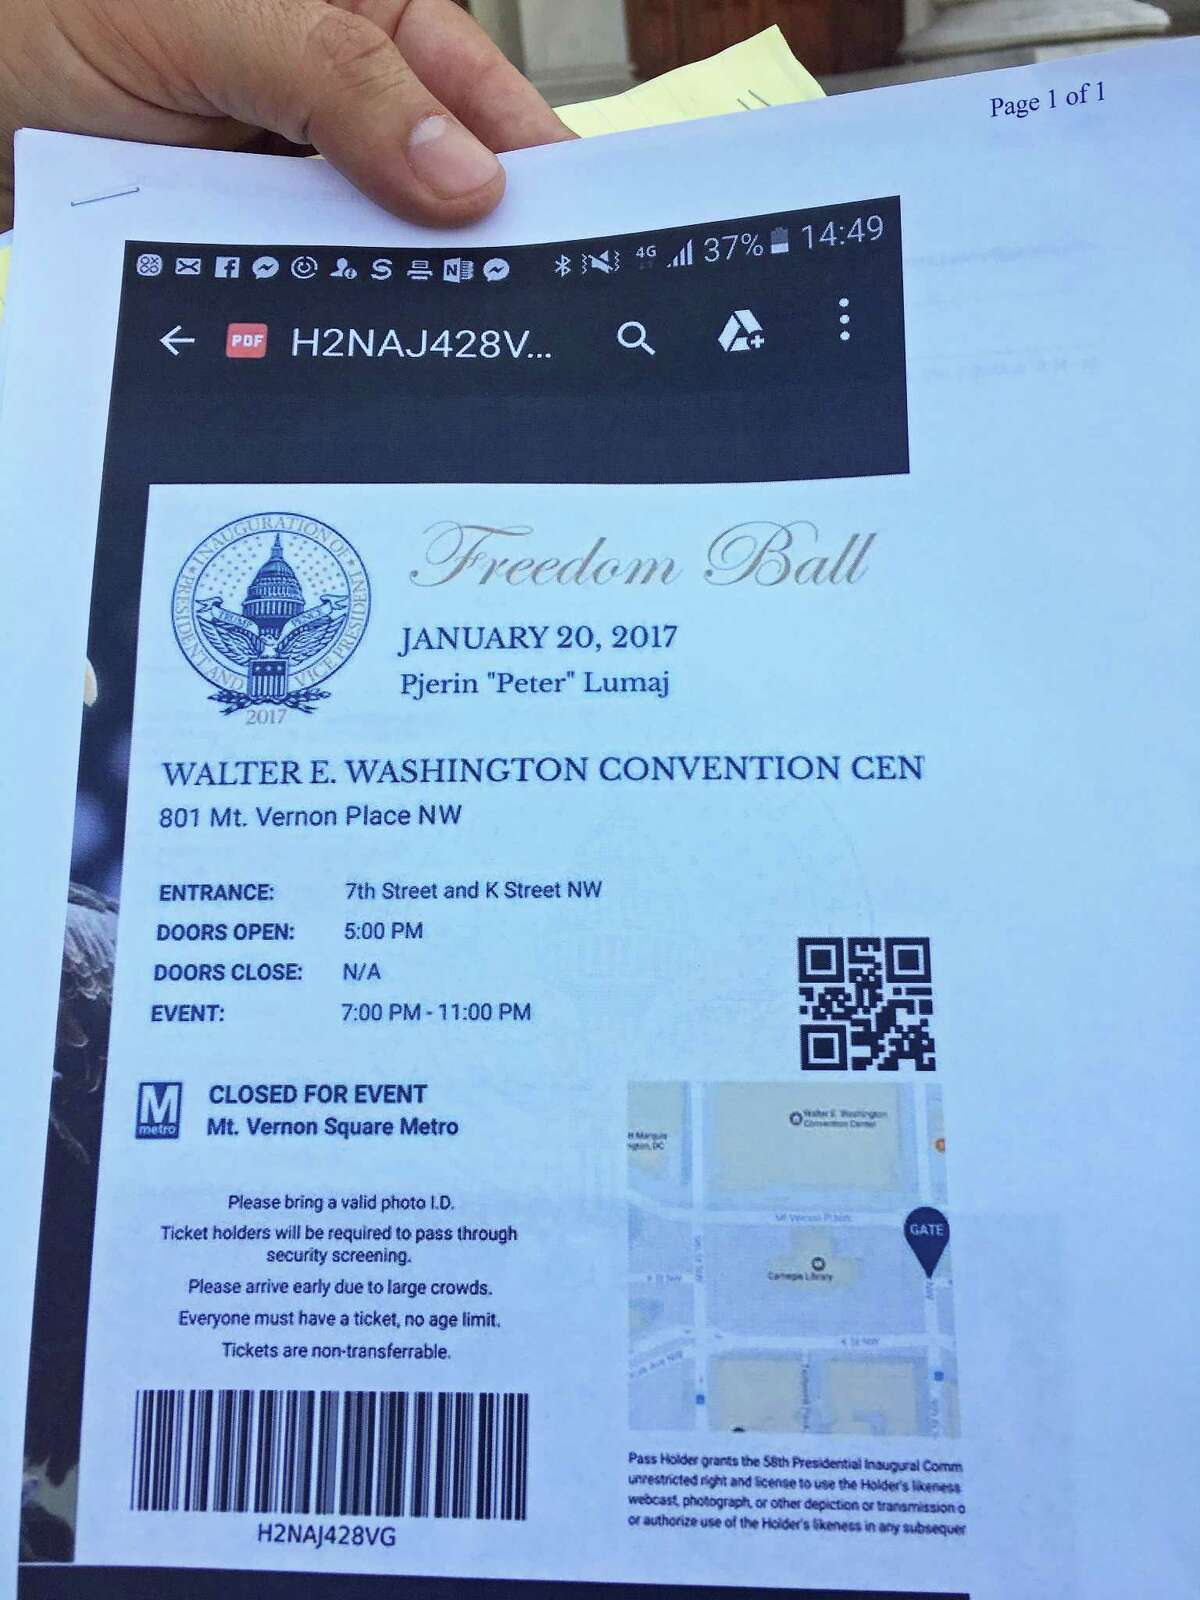 This is Republican gubernatorial candidate Peter Lumaj's ticket to the Freedom Ball, a public event held on the day of President Donald Trump's inauguration. Lumaj showed this ticket to reporters on Wednesday May 2, 2018, saying it was proof that he was "invited" to Trump's inauguration.